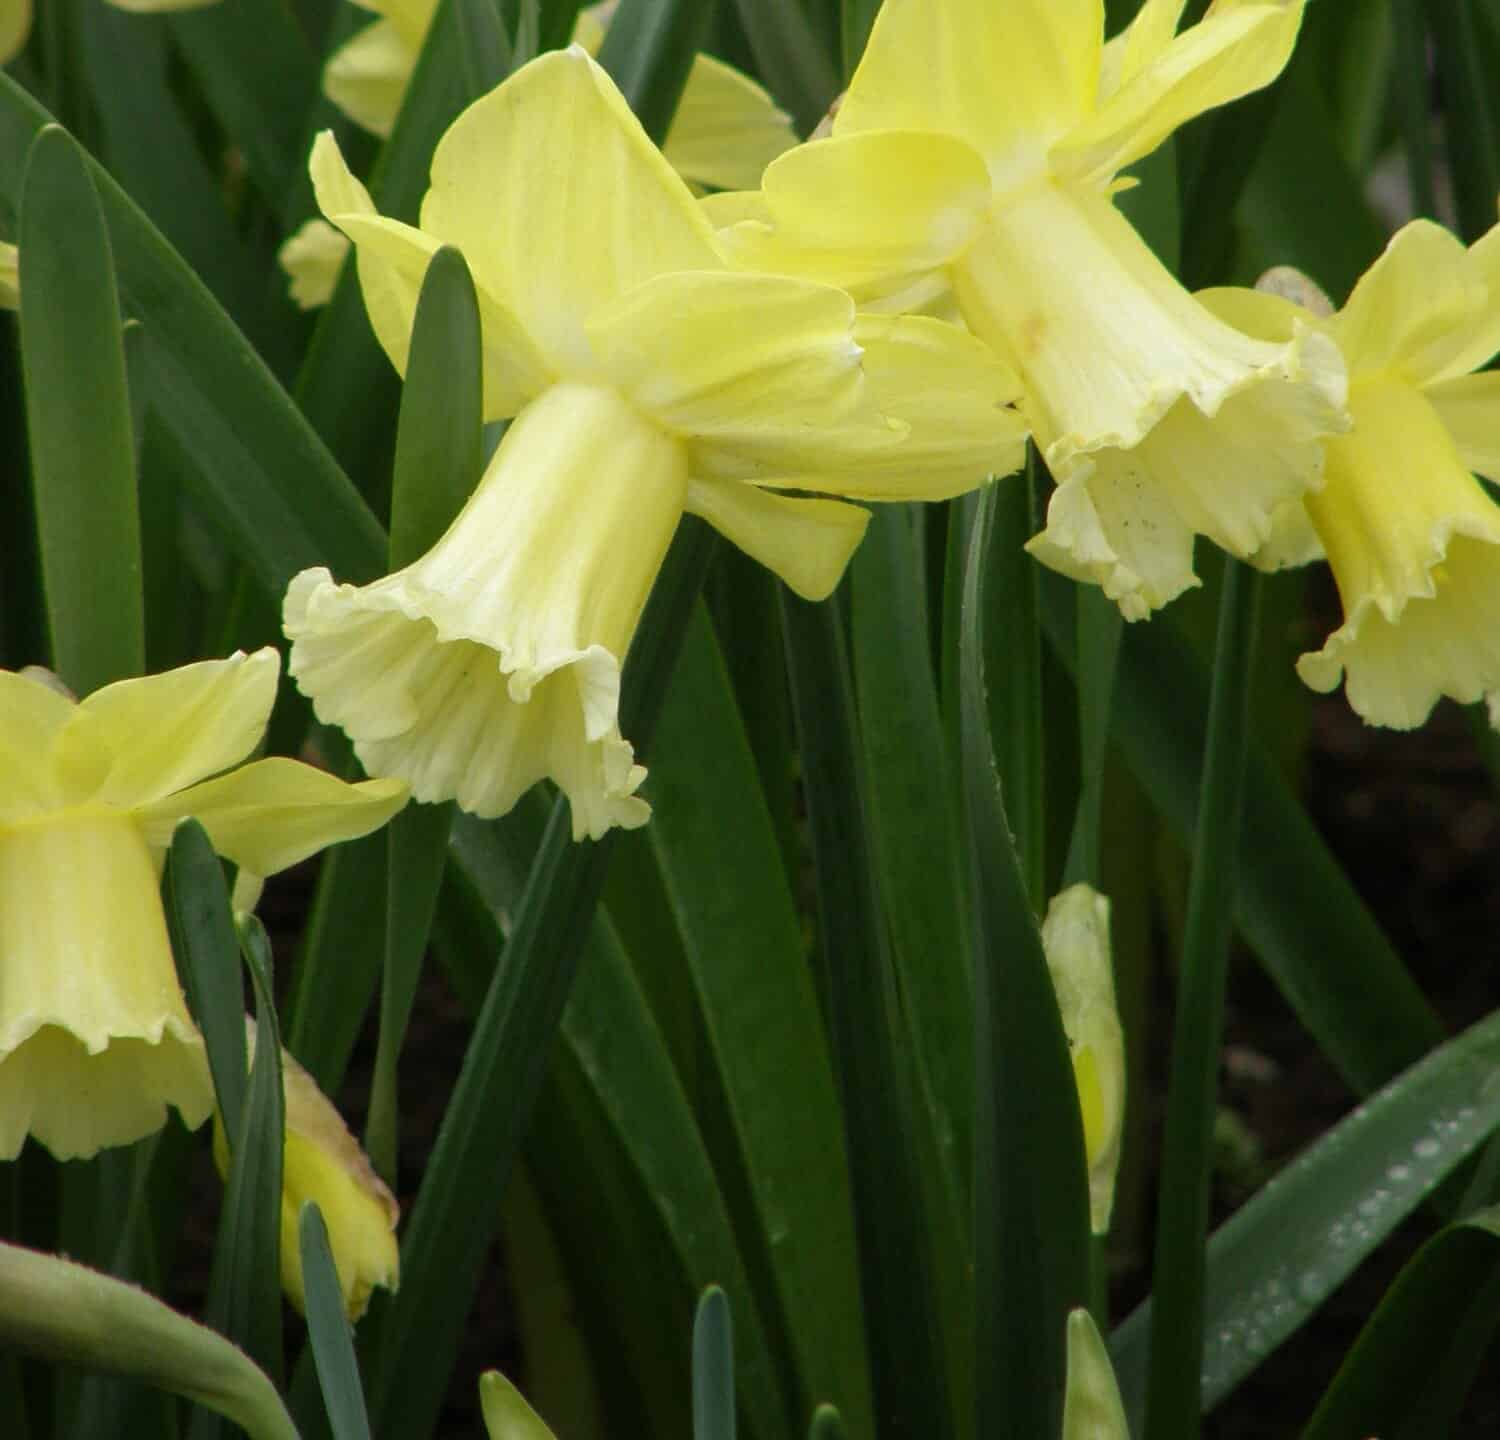 Yellow Trumpet daffodils (Narcissus) Galactic Star bloom in a garden in March